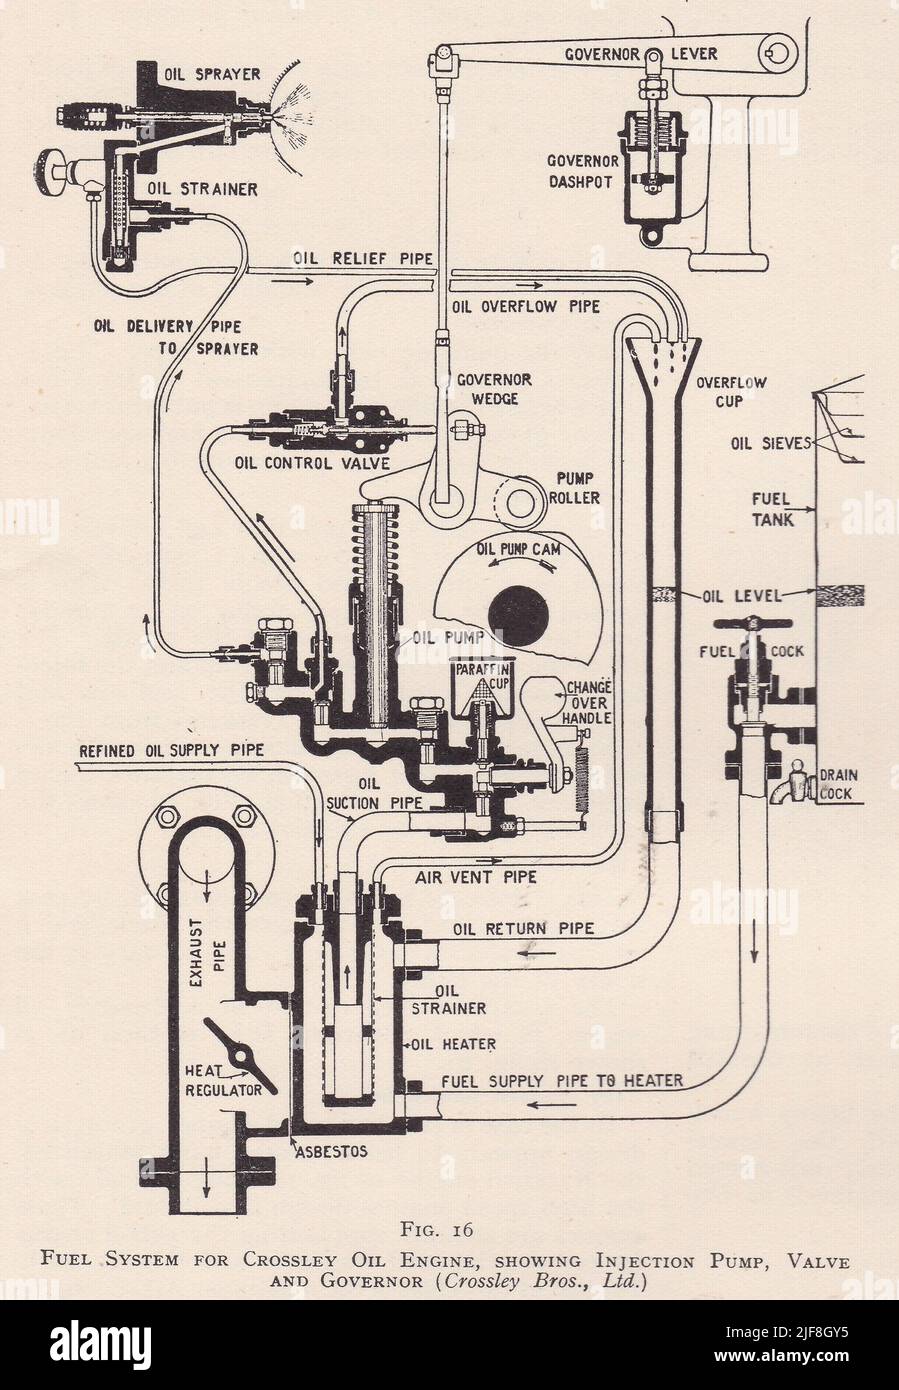 Vintage diagram of a fuel system for Crossley Oil Engine, showing Injection Pump, Valve and Governor - Crossley Bros. Ltd. Stock Photo